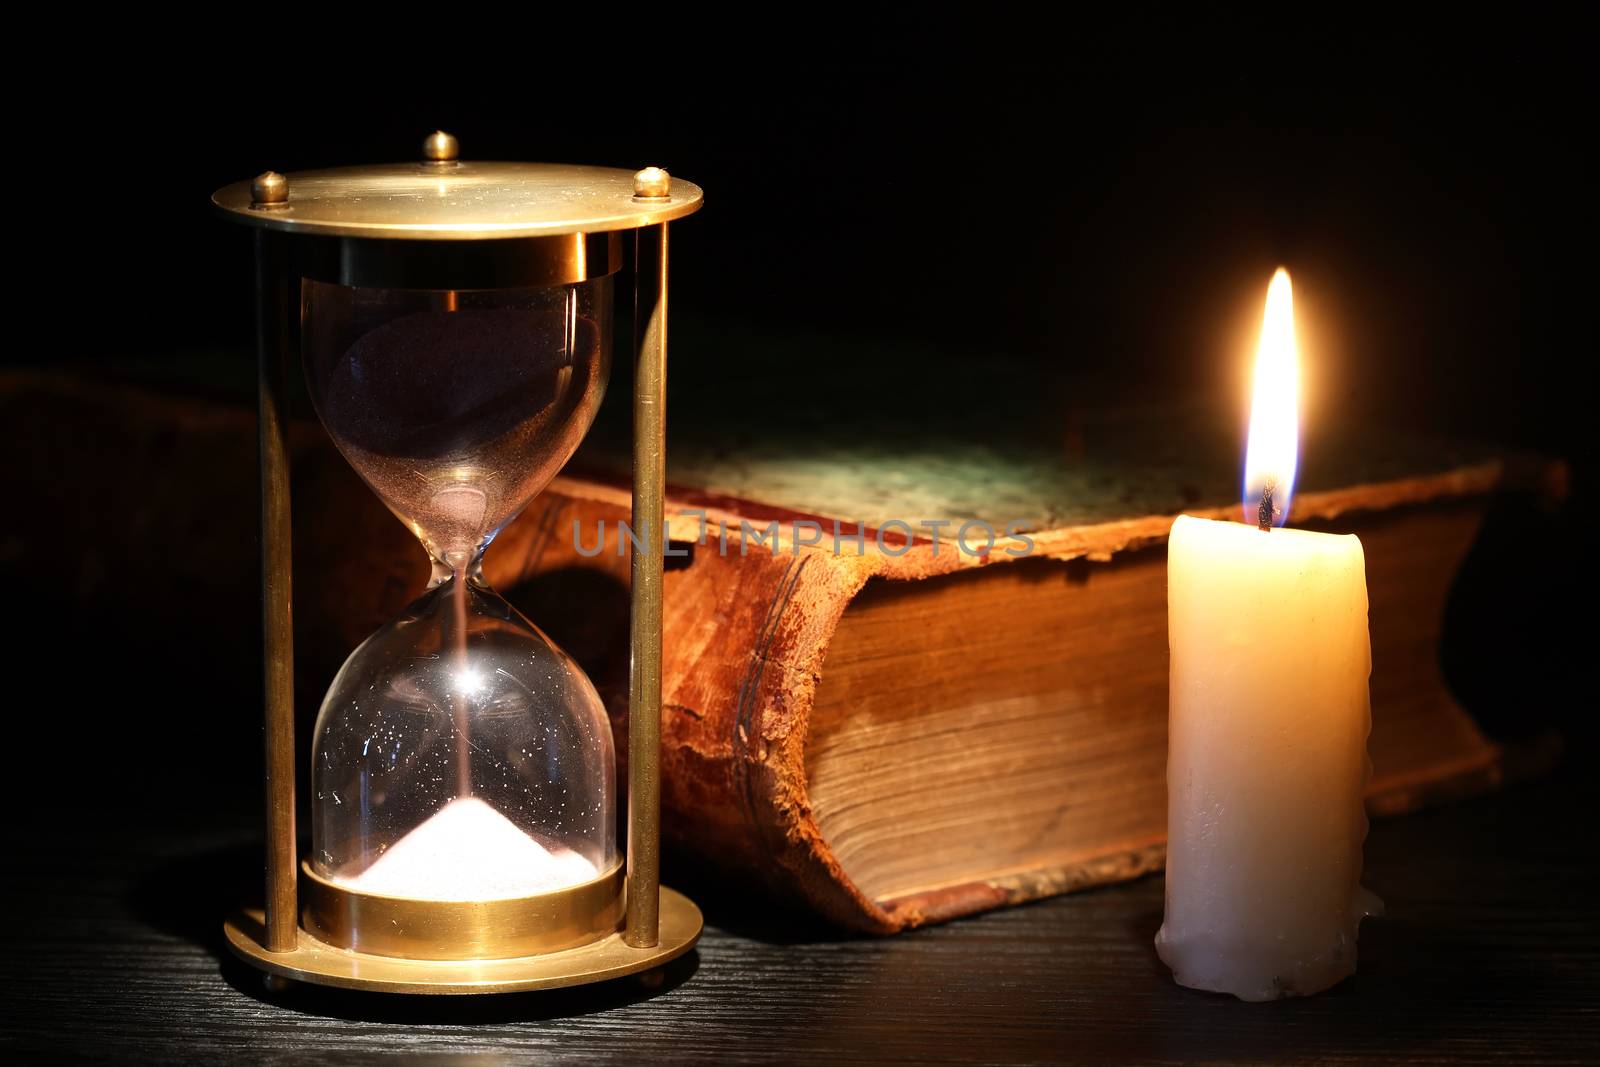 Vintage hourglass near lighting candle on dark background